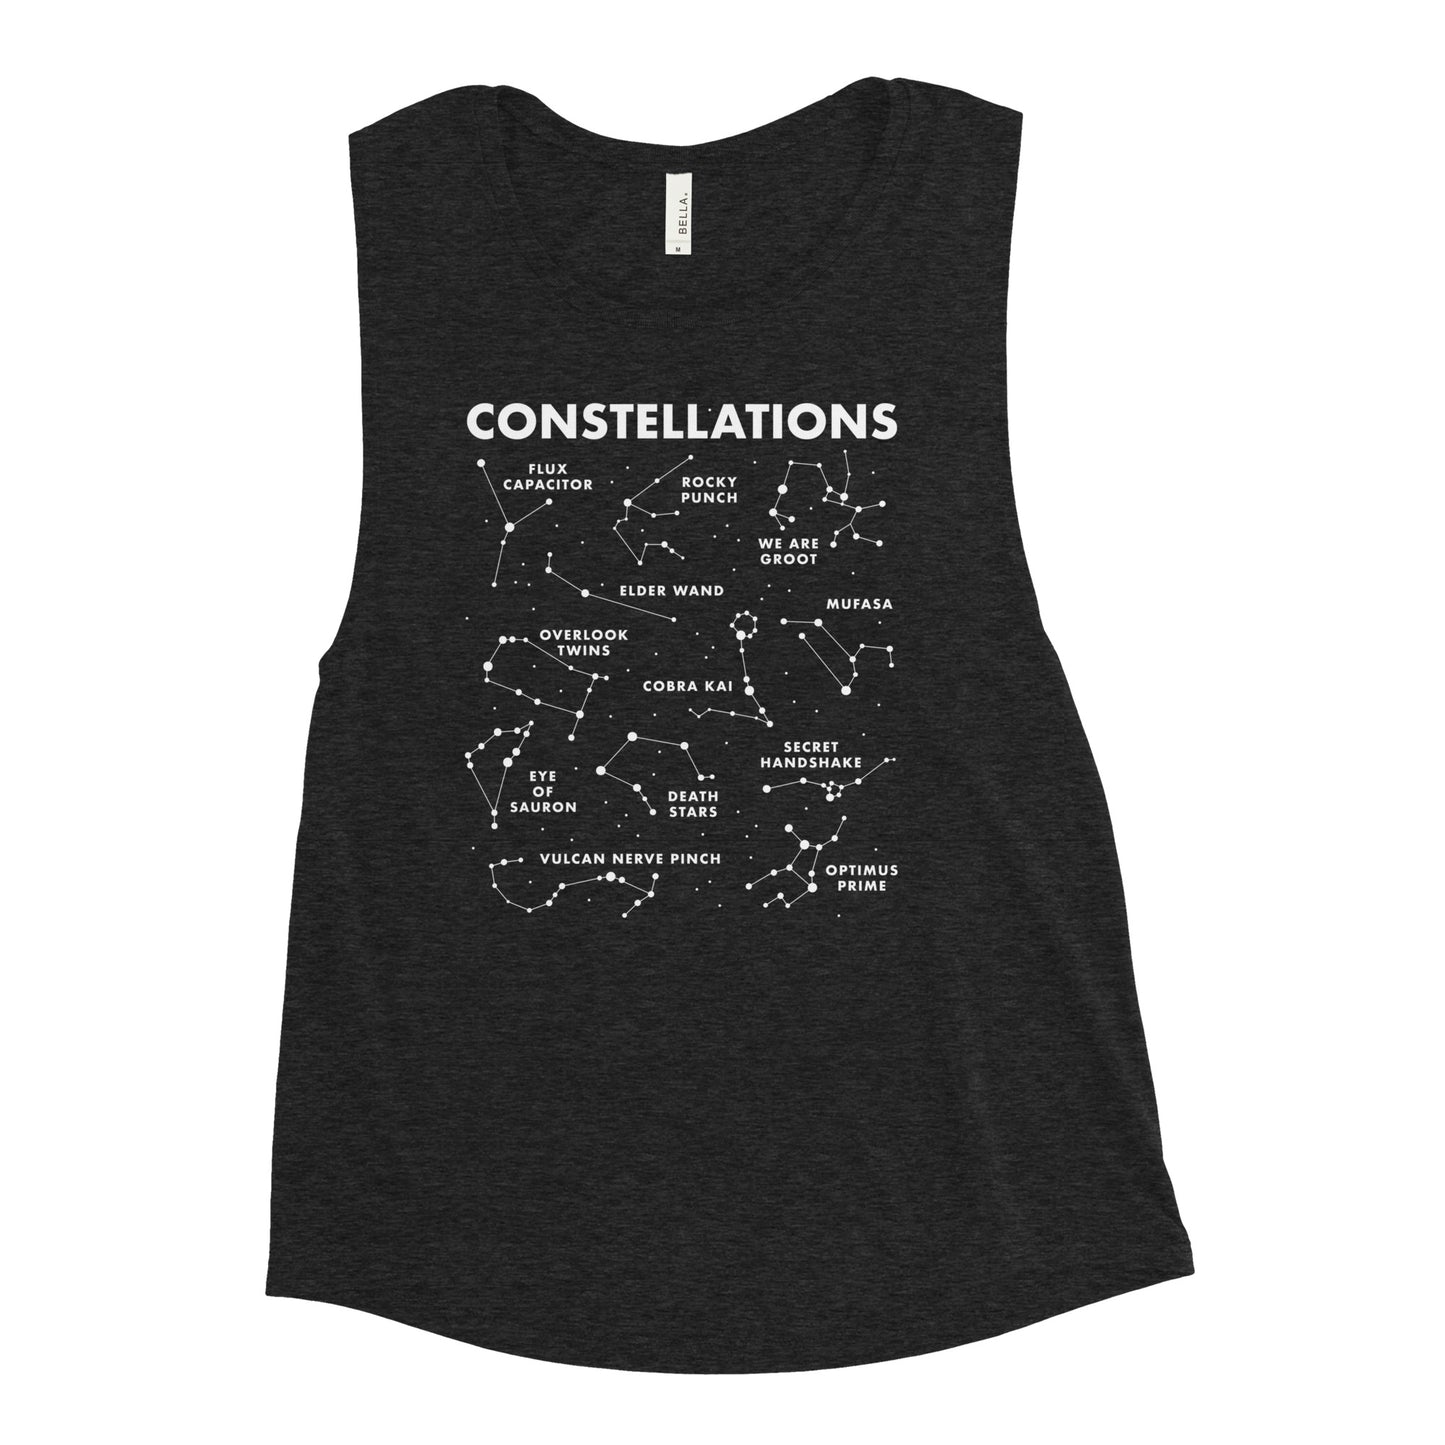 Constellations Women's Muscle Tank